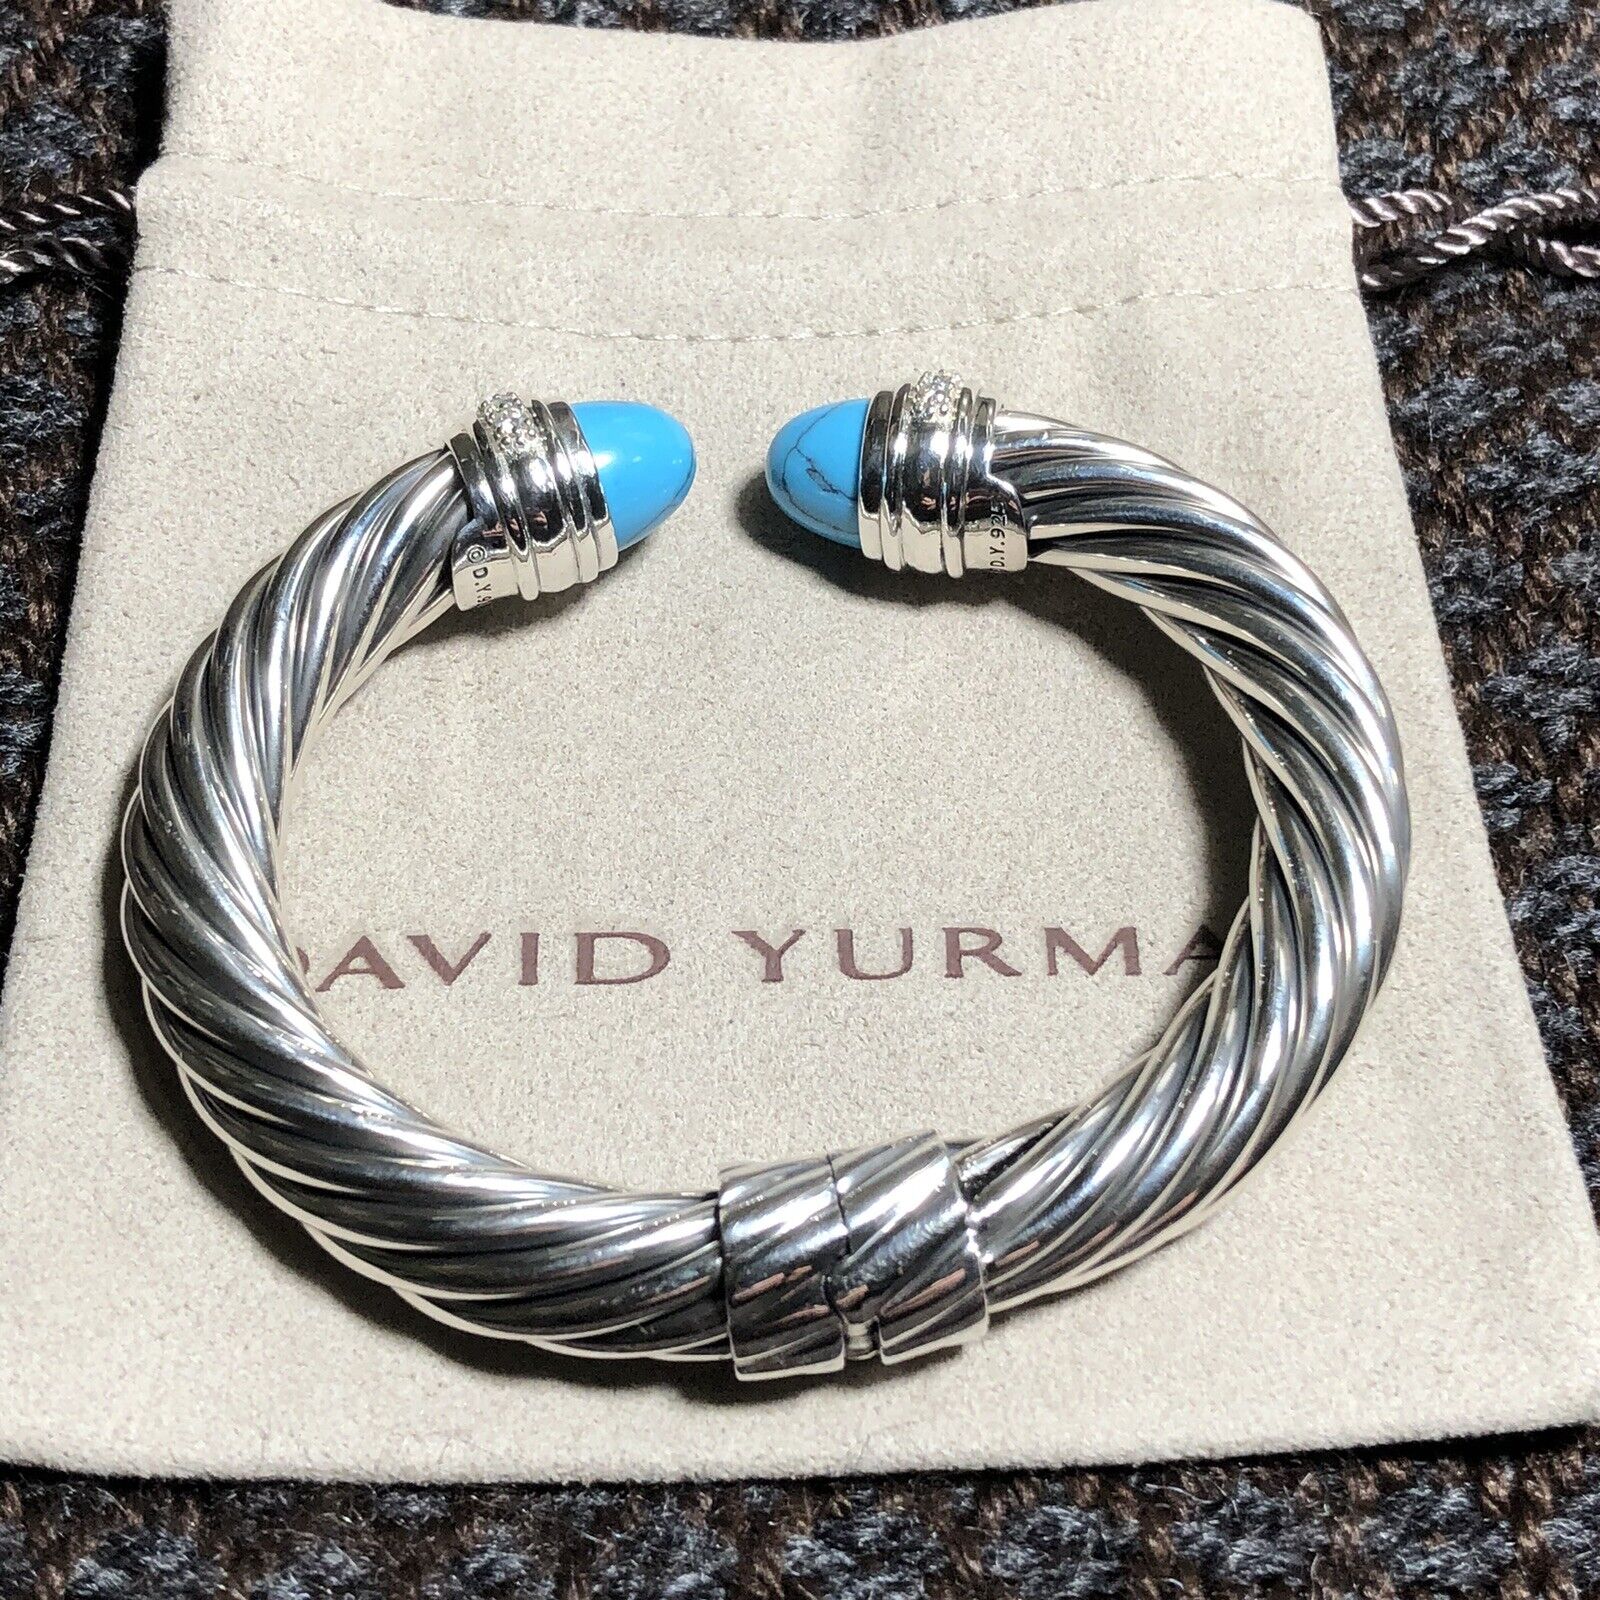 David Yurman Sterling Silver 10mm Cable Bracelet with Blue Turquoise & Diamonds